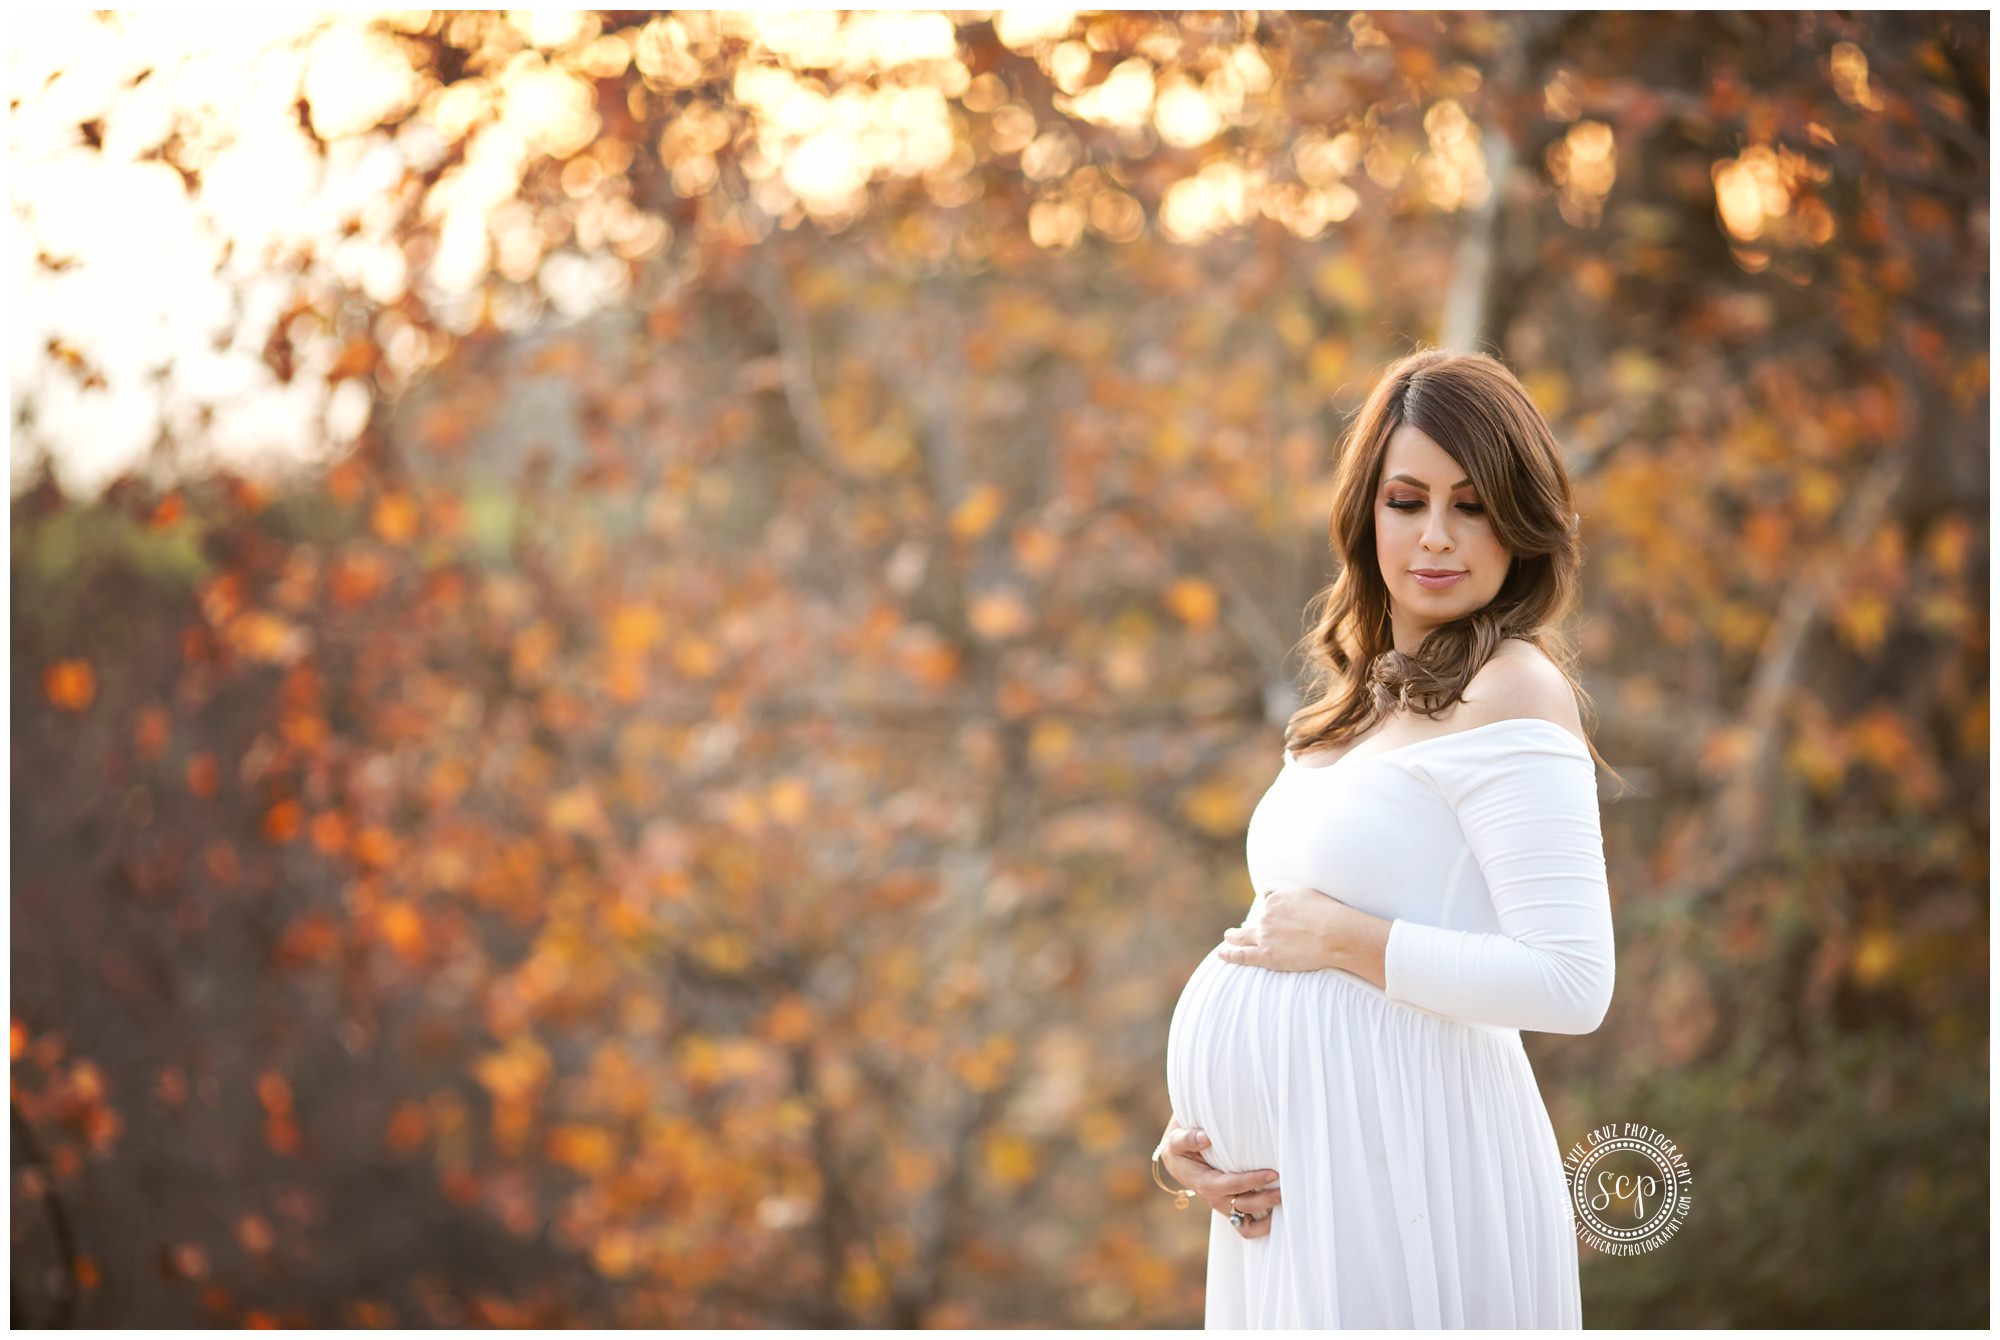 Maternity Pictures in Orange County California